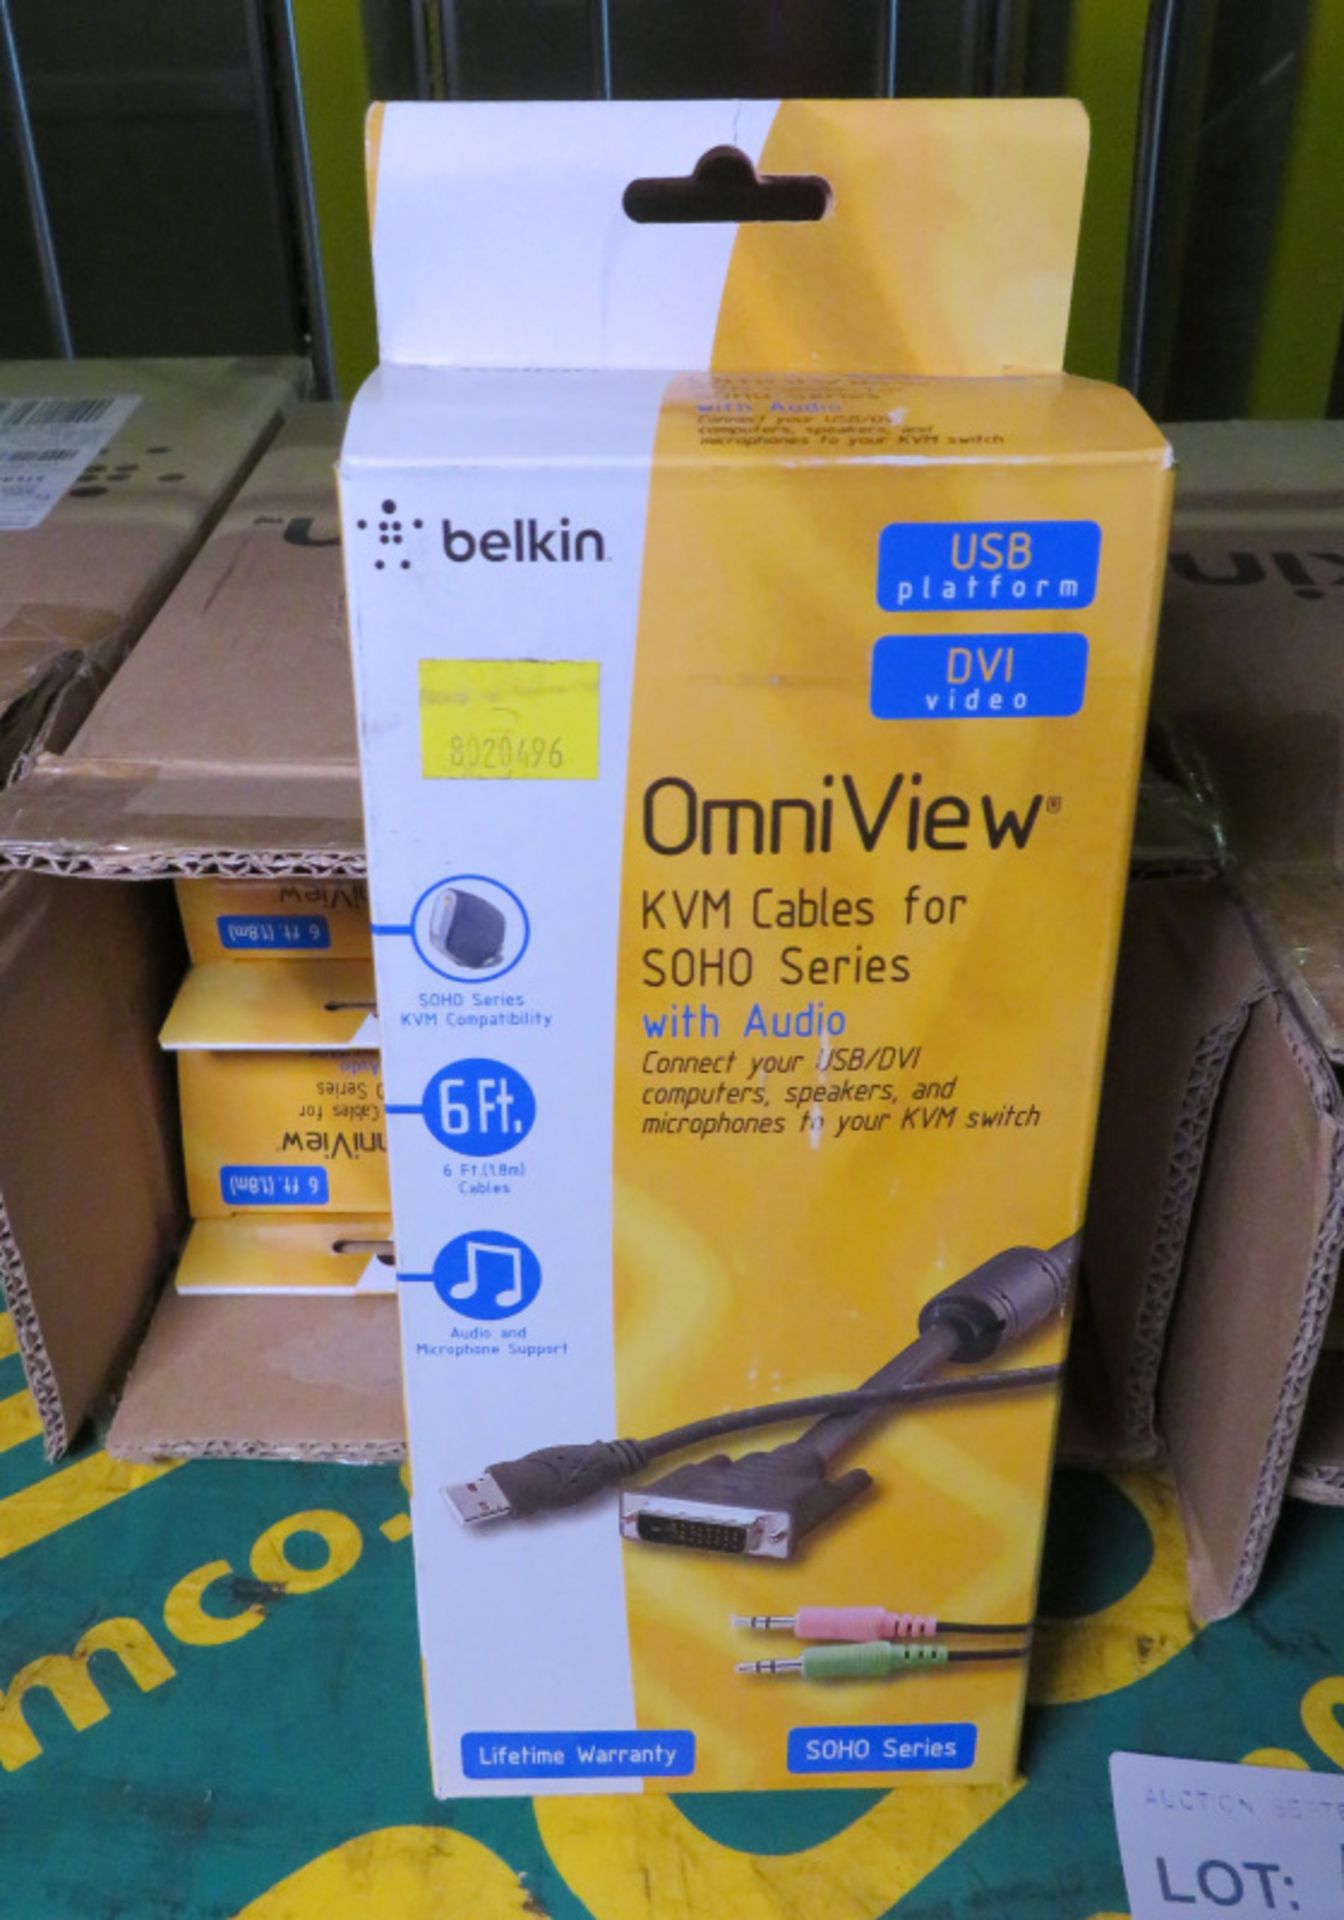 16x Belkin OmniView KVM Cables For SOHO Series With Audio - Image 2 of 2